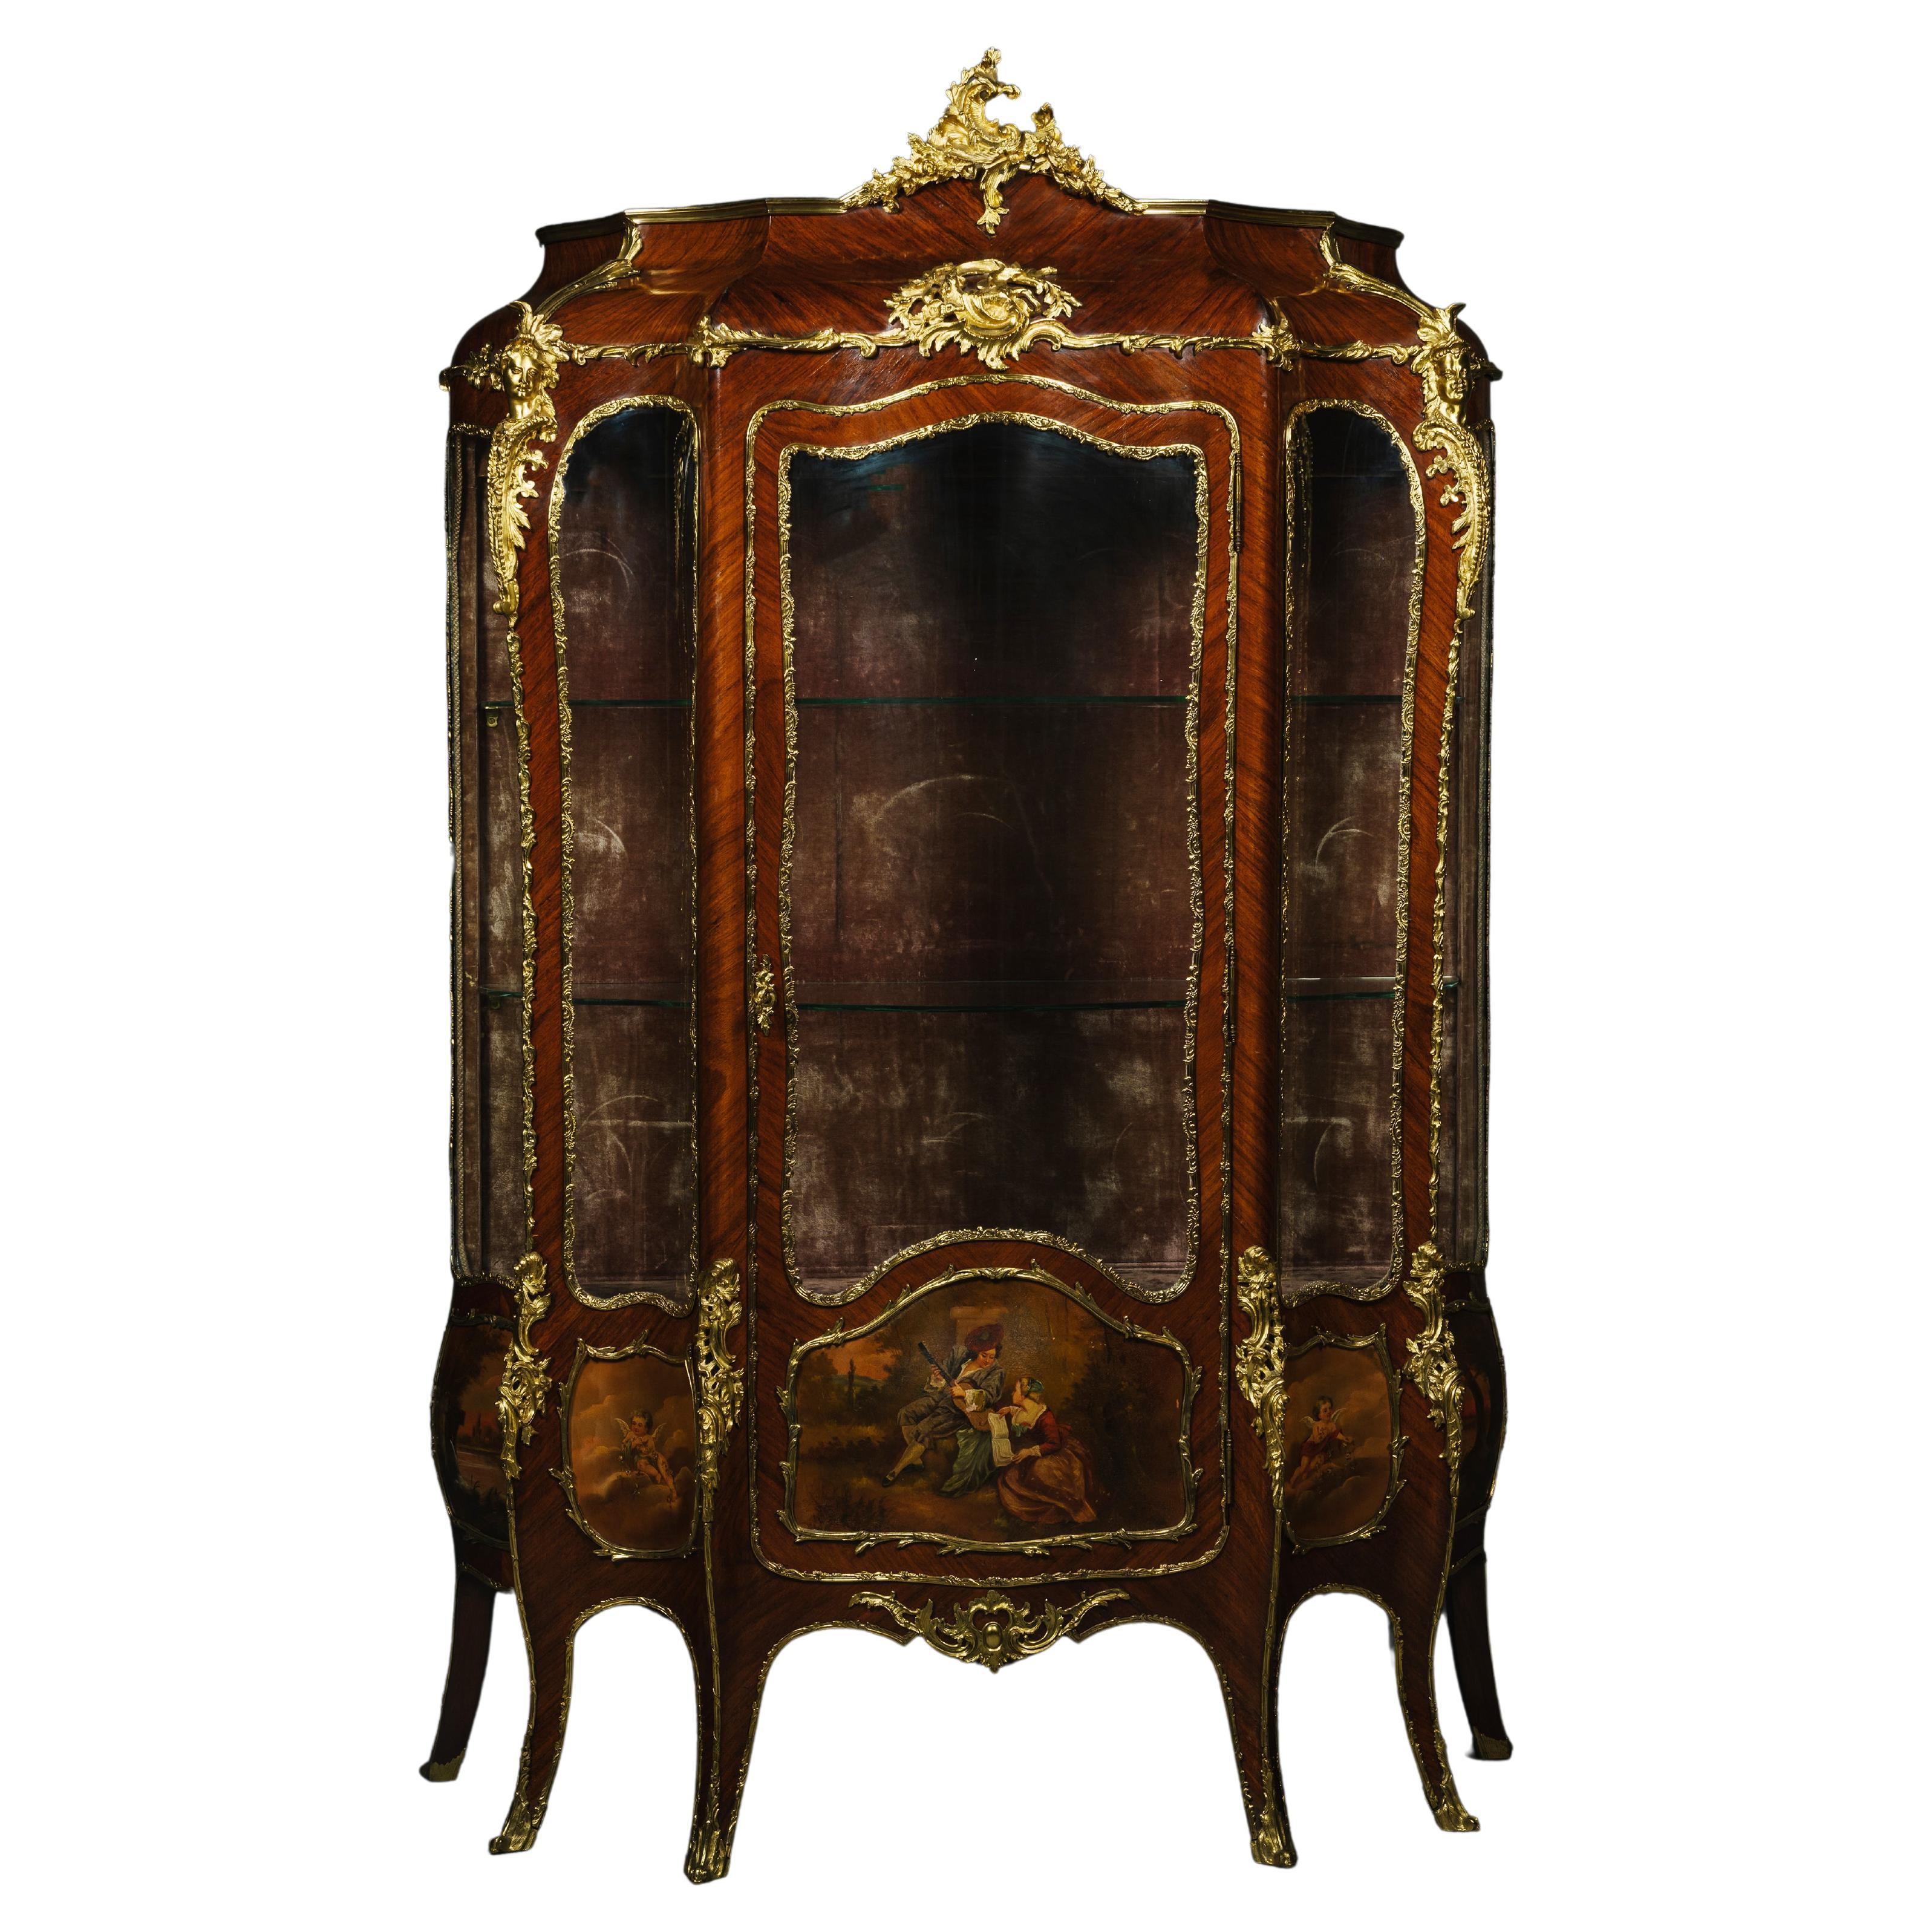 A Louis XV Style Gilt-Bronze Mounted, Vernis Martin Vitrine Cabinet For Sale